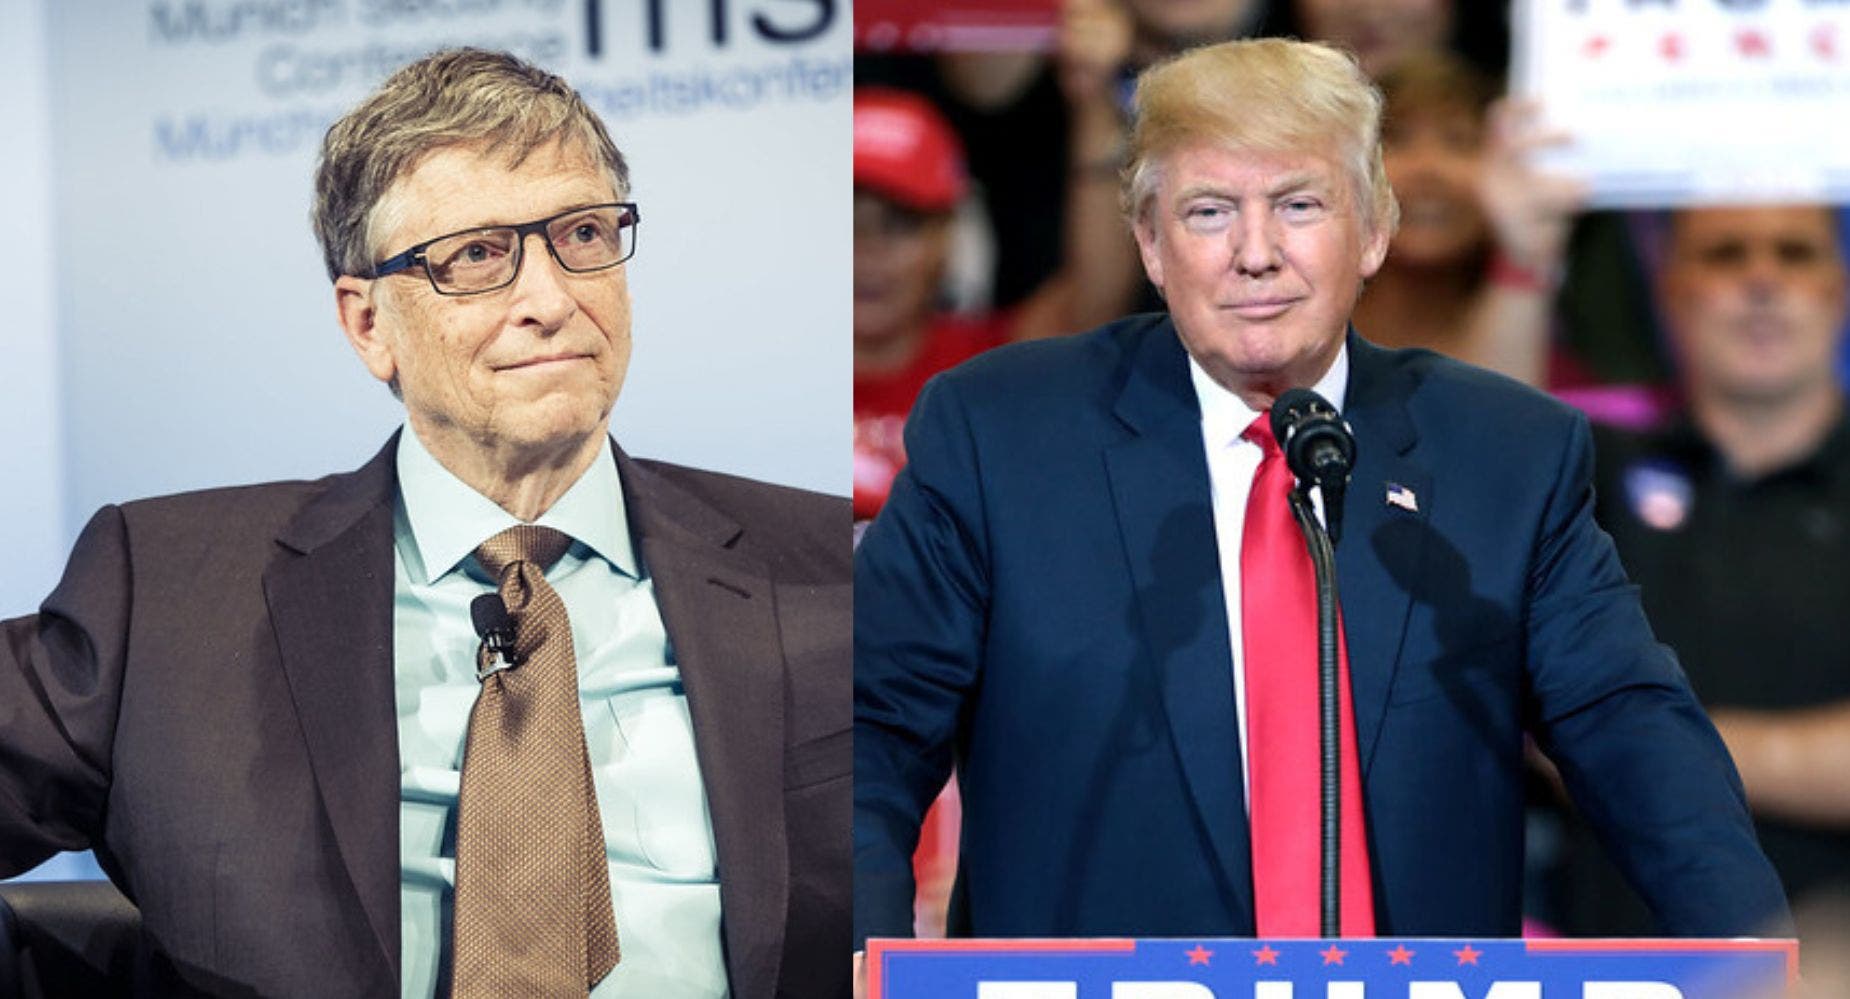 Bill Gates Once Described Trump As An Illeist: 'His First Sentence Kind Of Threw Me Off'